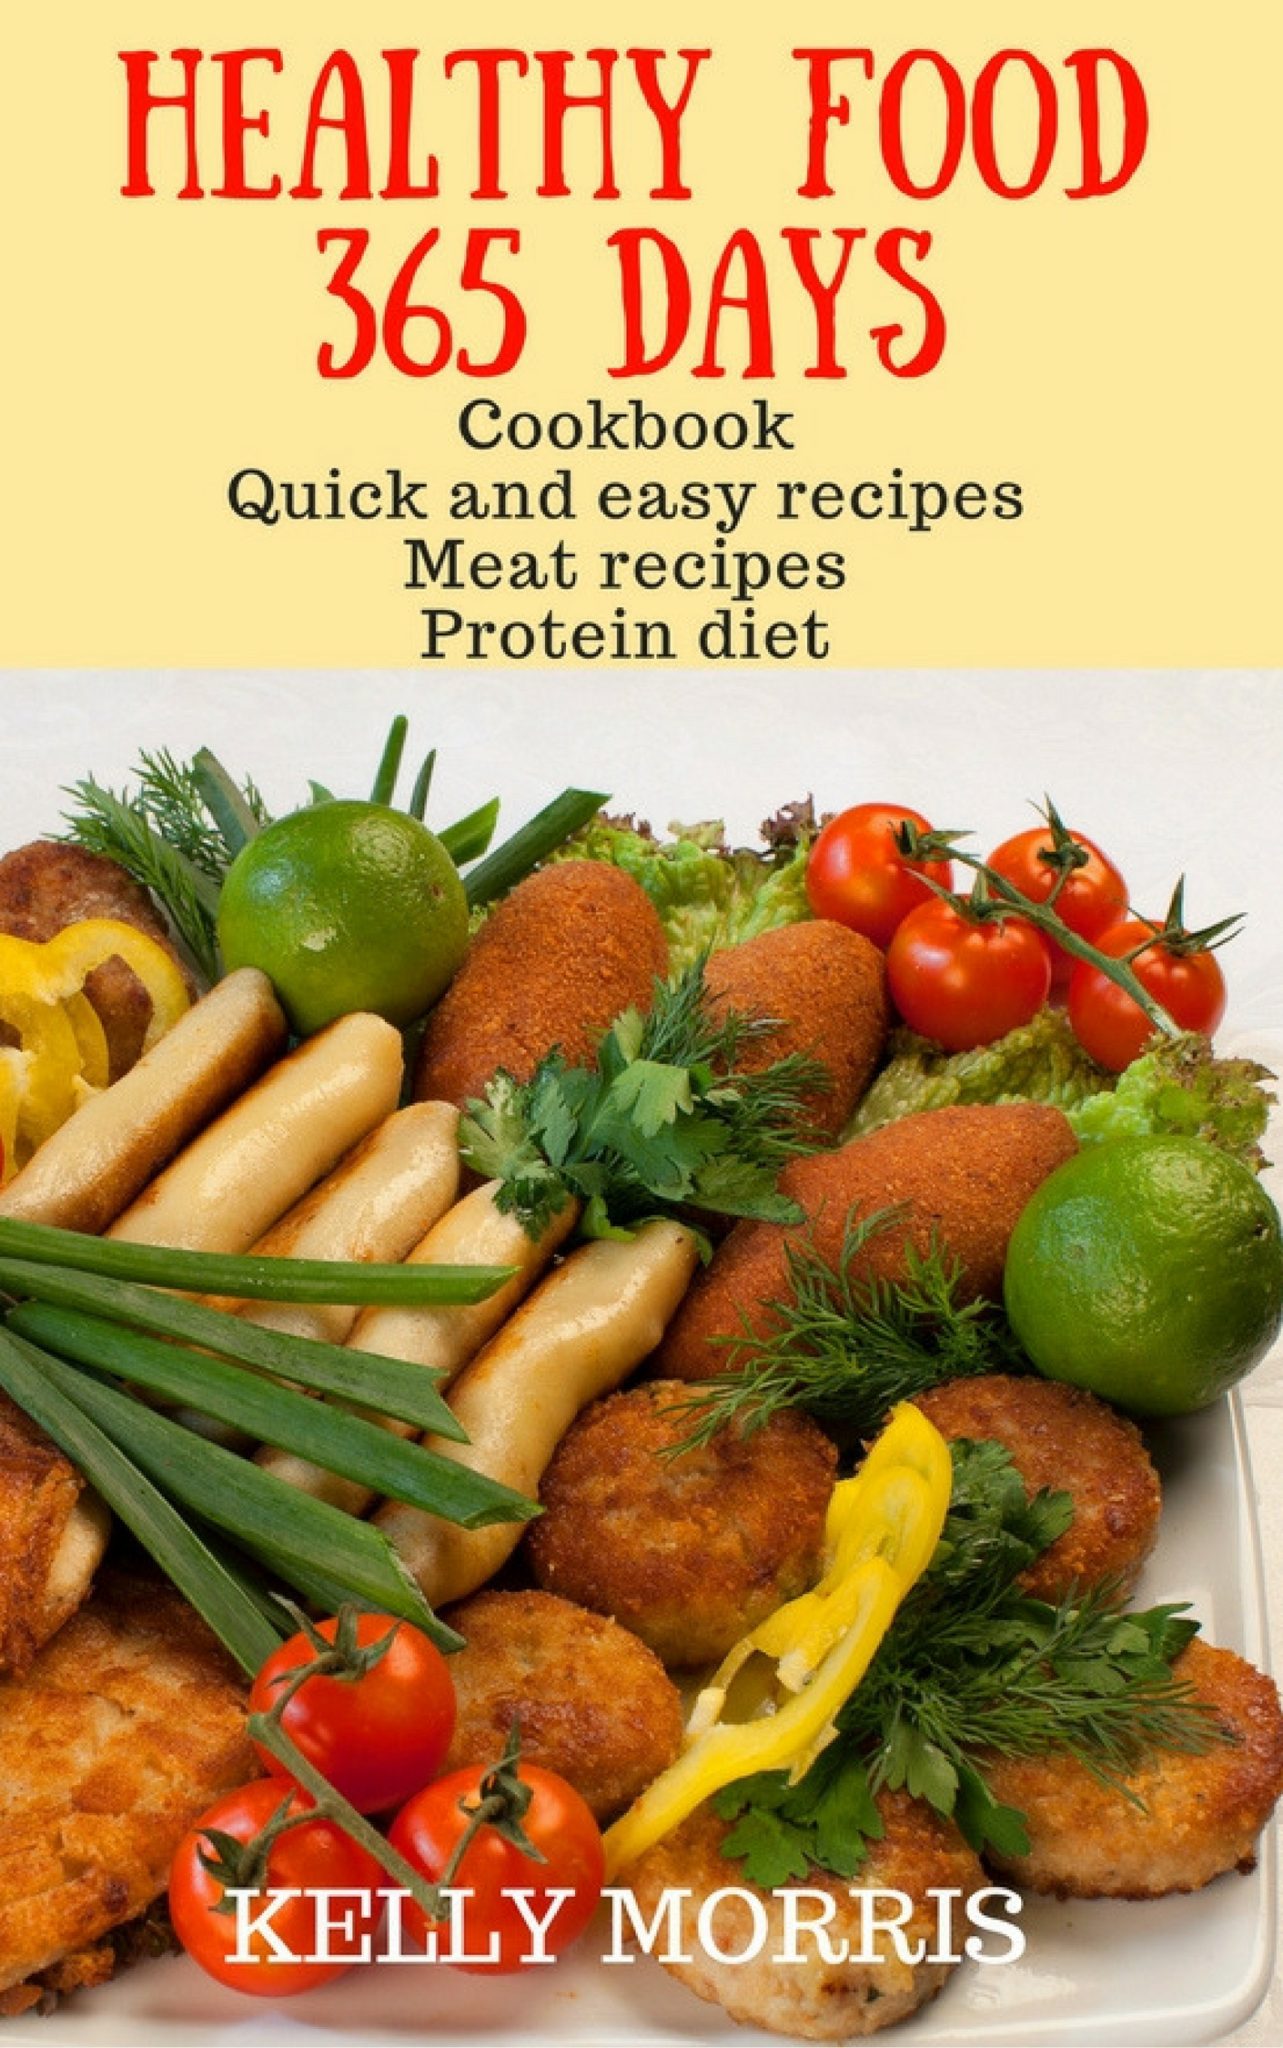 FREE: Healthy food 365 days: Cookbook Quick and easy recipes Meat recipes Protein diet by Kelly Morris